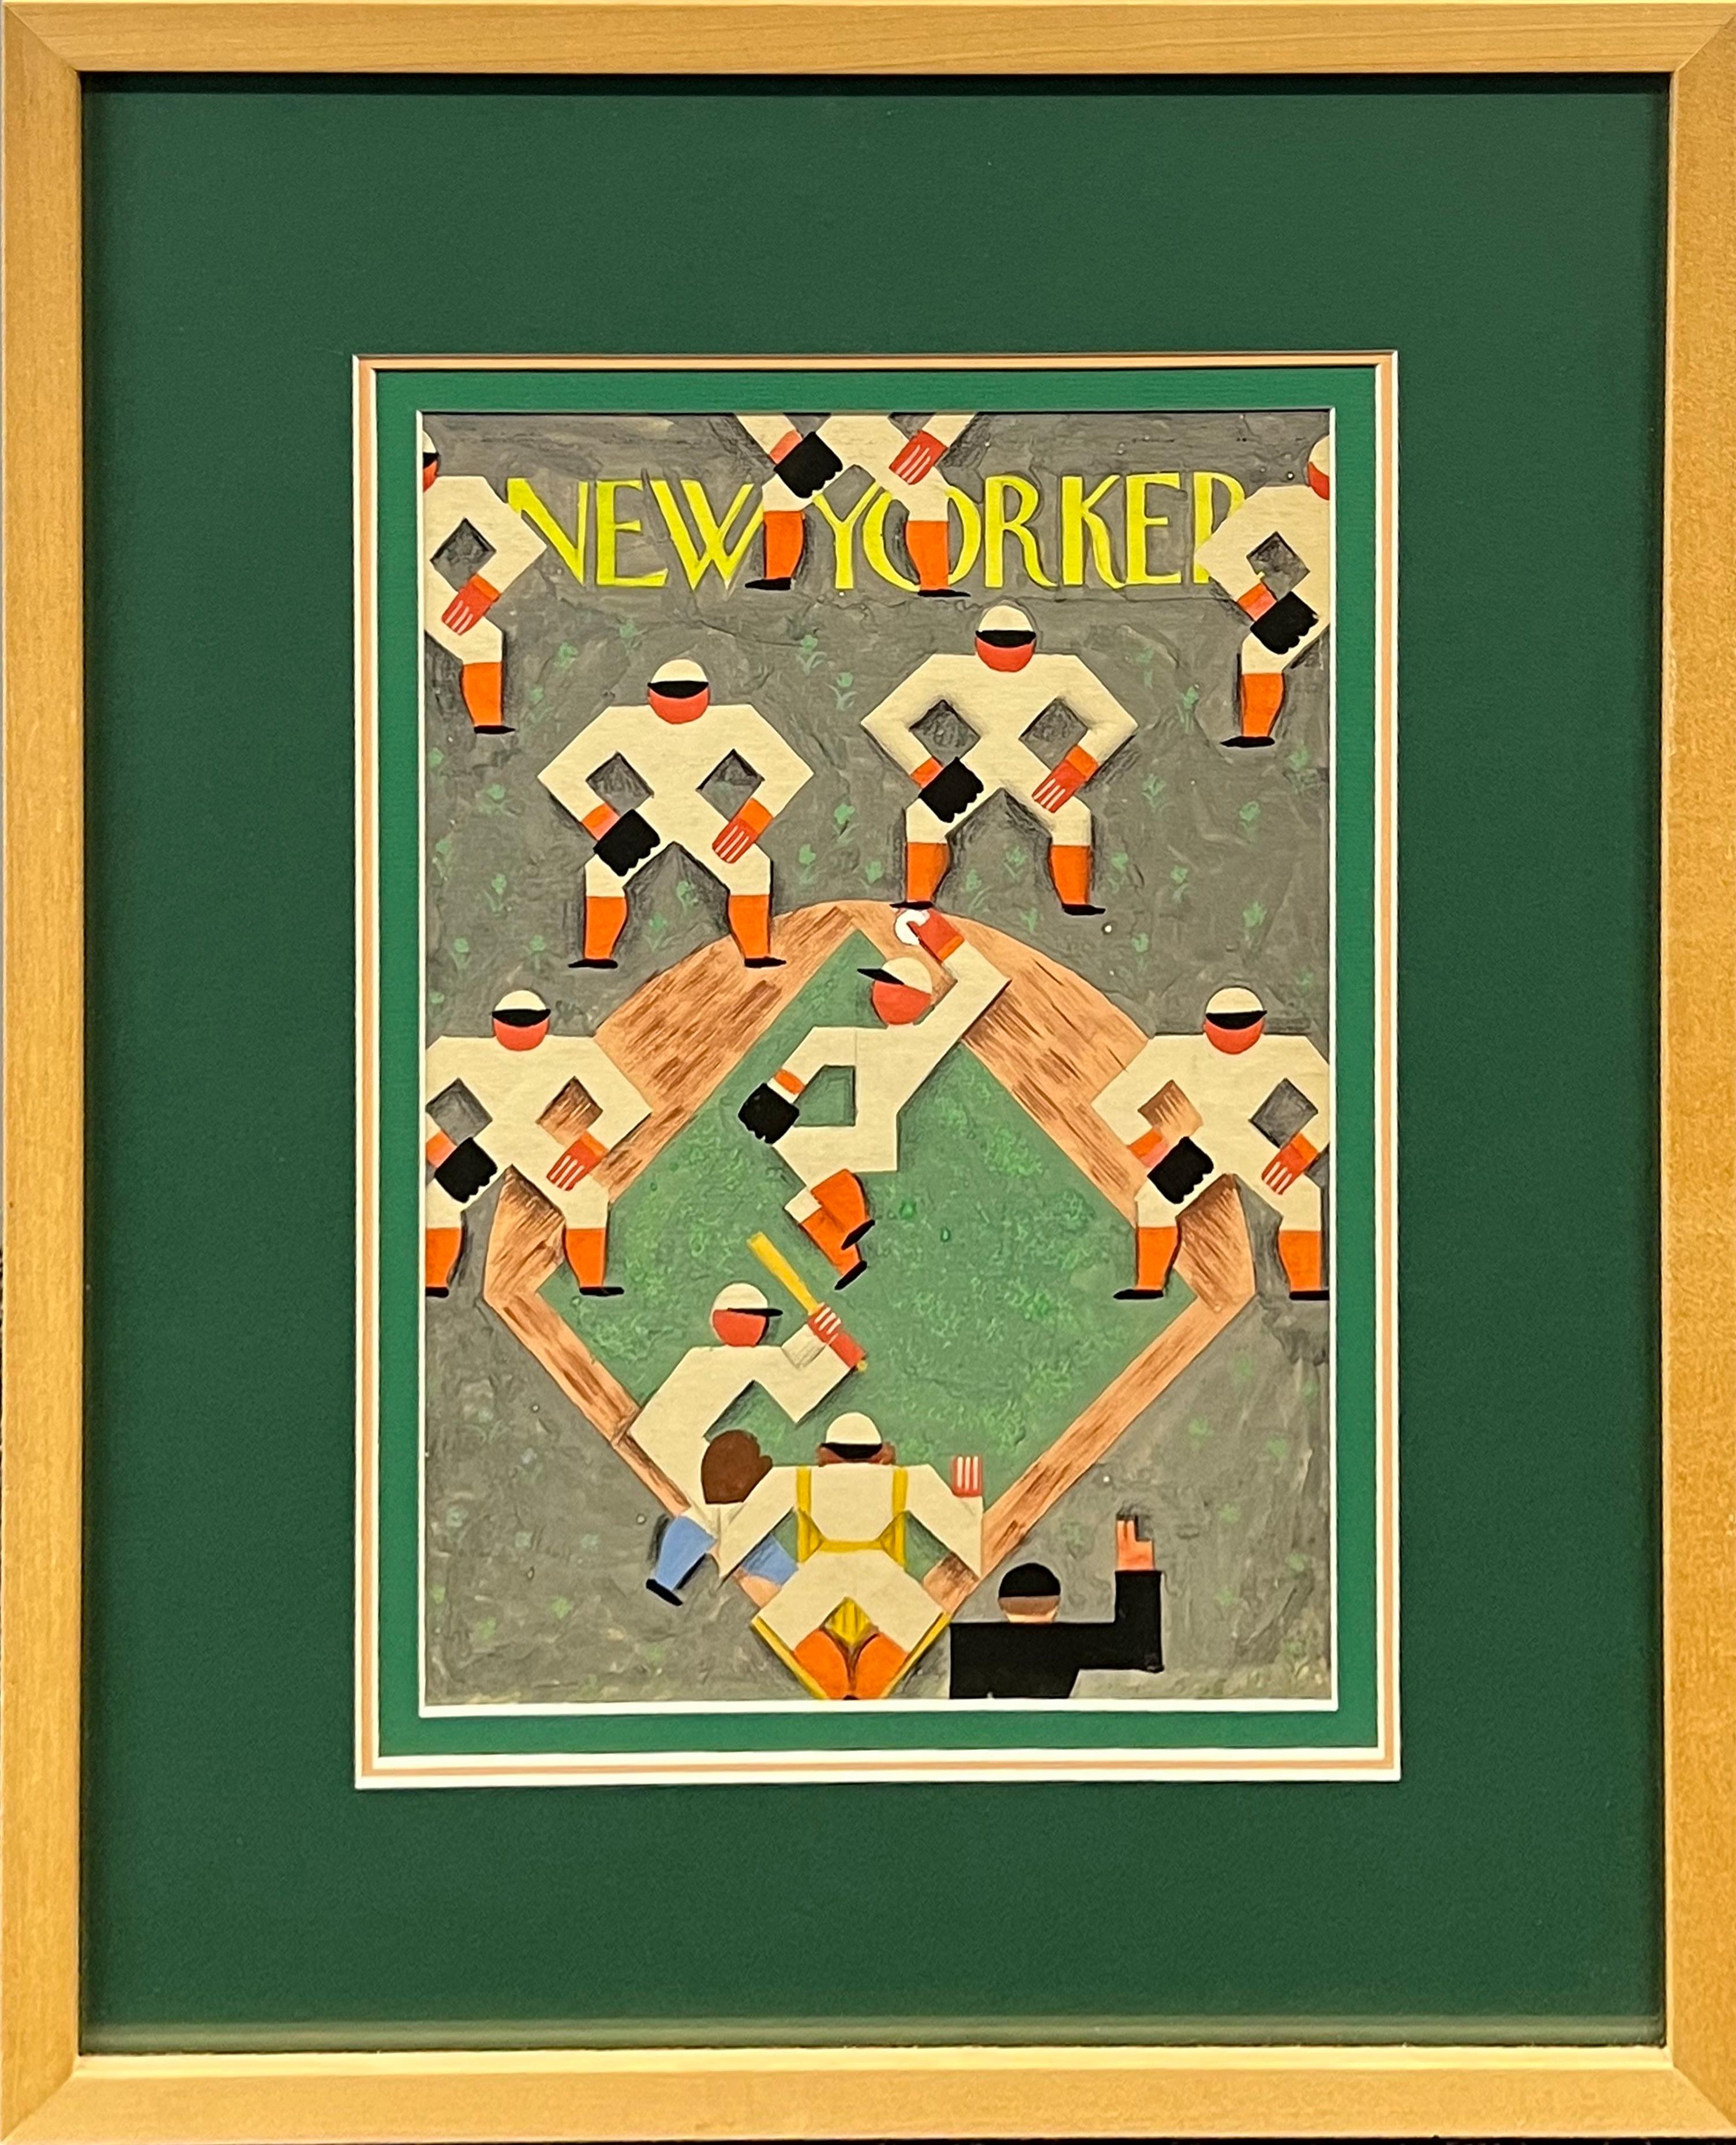 Original Painting. New Yorker Cover Proposal Baseball c. 1939 Modern Cubist Deco

Antonio Petruccelli (1907 - 1994)
Play Ball
New Yorker cover proposal, c. 1939
12 x 8 inches (sight)
Framed 18 1/2 X 14 3/4 inches
Gouache on board
Estate sticker